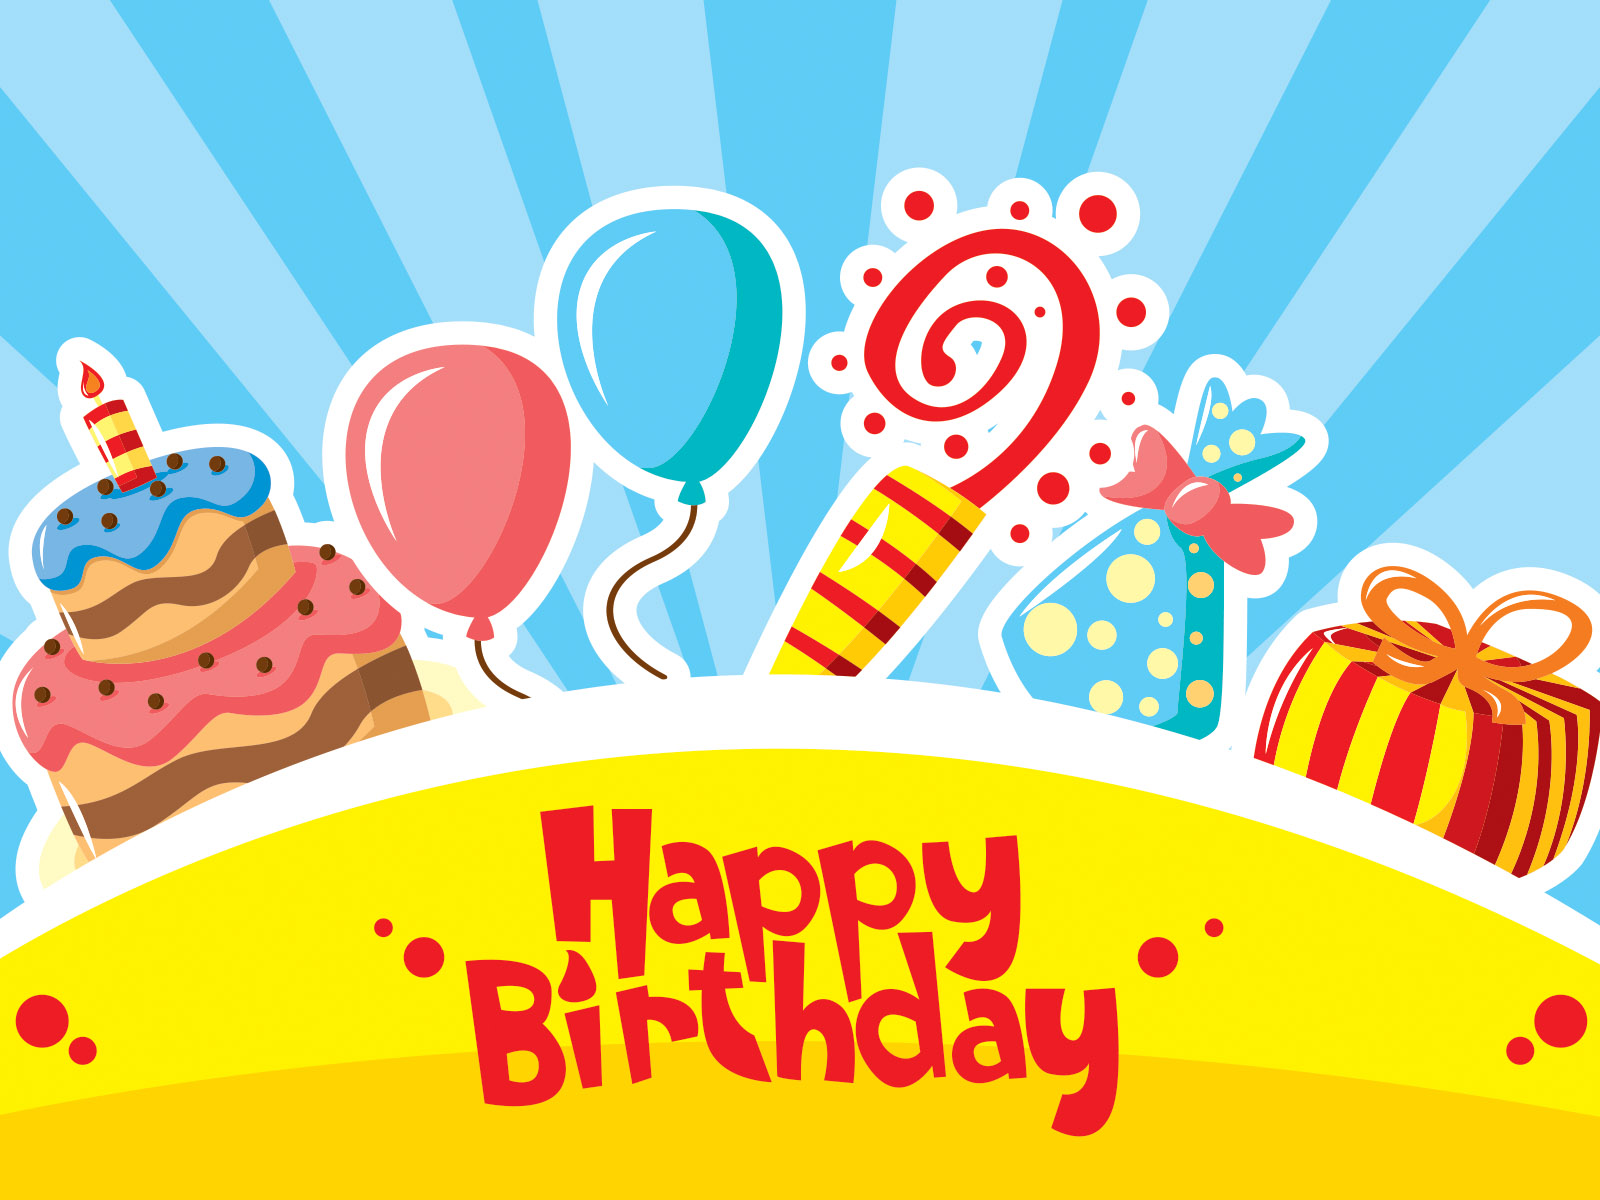 Happy Birthday Cake Powerpoint Templates - Food & Drink, Holidays - Free PPT  Backgrounds and Templates